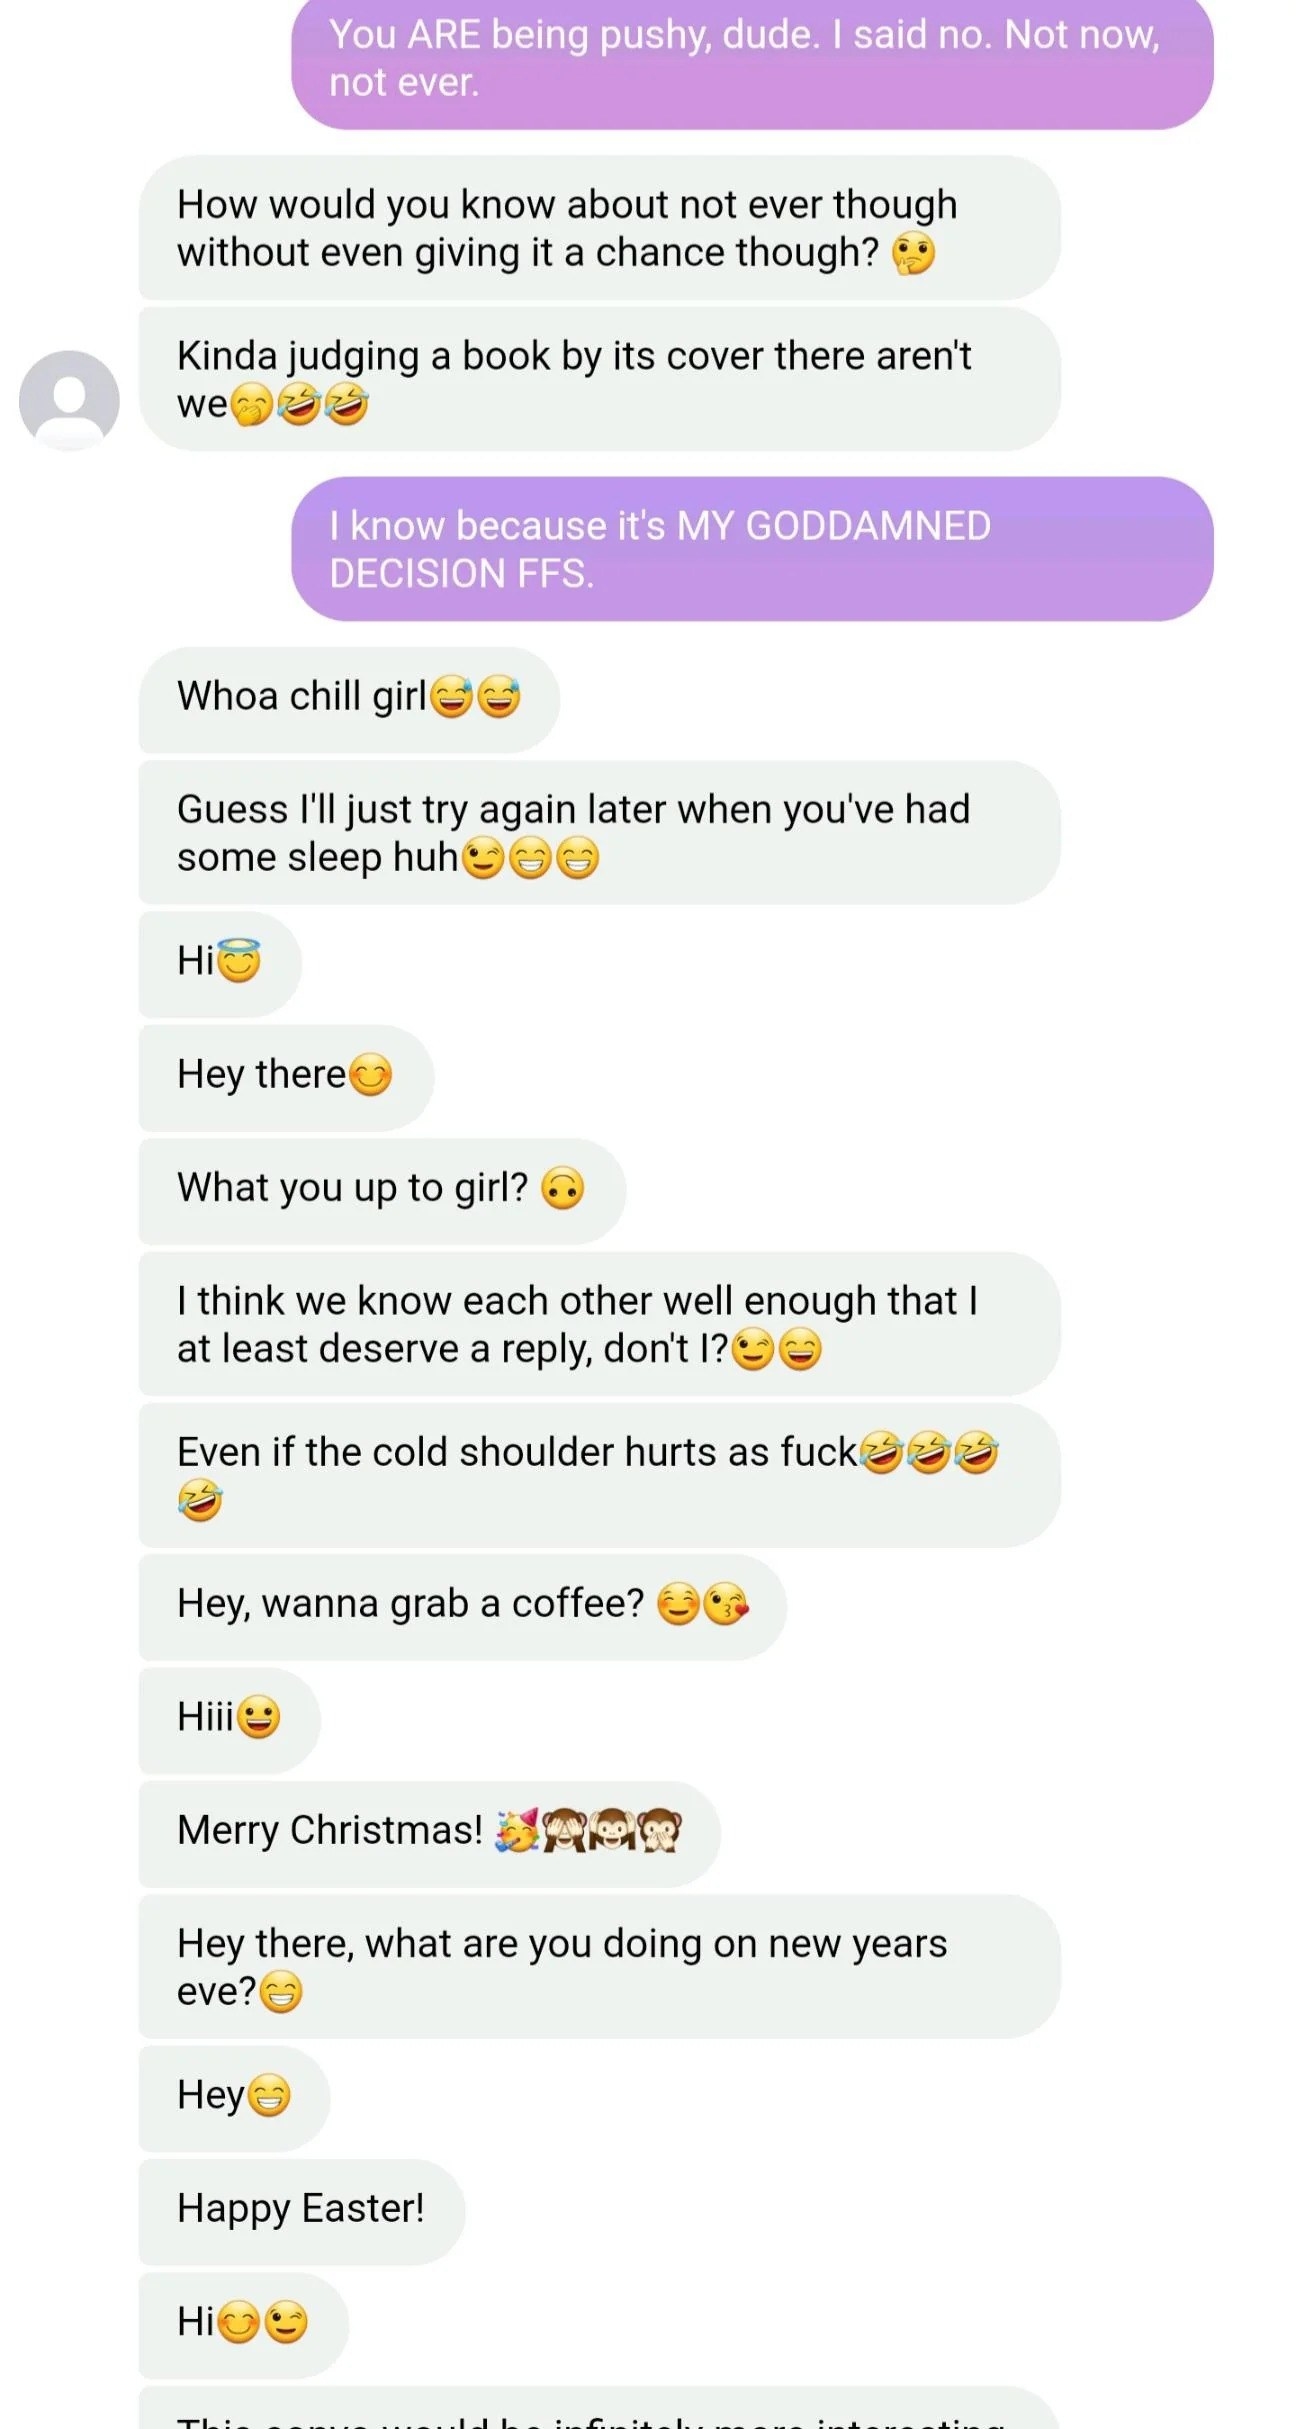 He continues to be pushy and says he guesses he&#x27;ll have to try again later after she&#x27;s had some sleep, then goes on to say stuff like &quot;Merry Christmas&quot; and &quot;Happy Easter&quot;